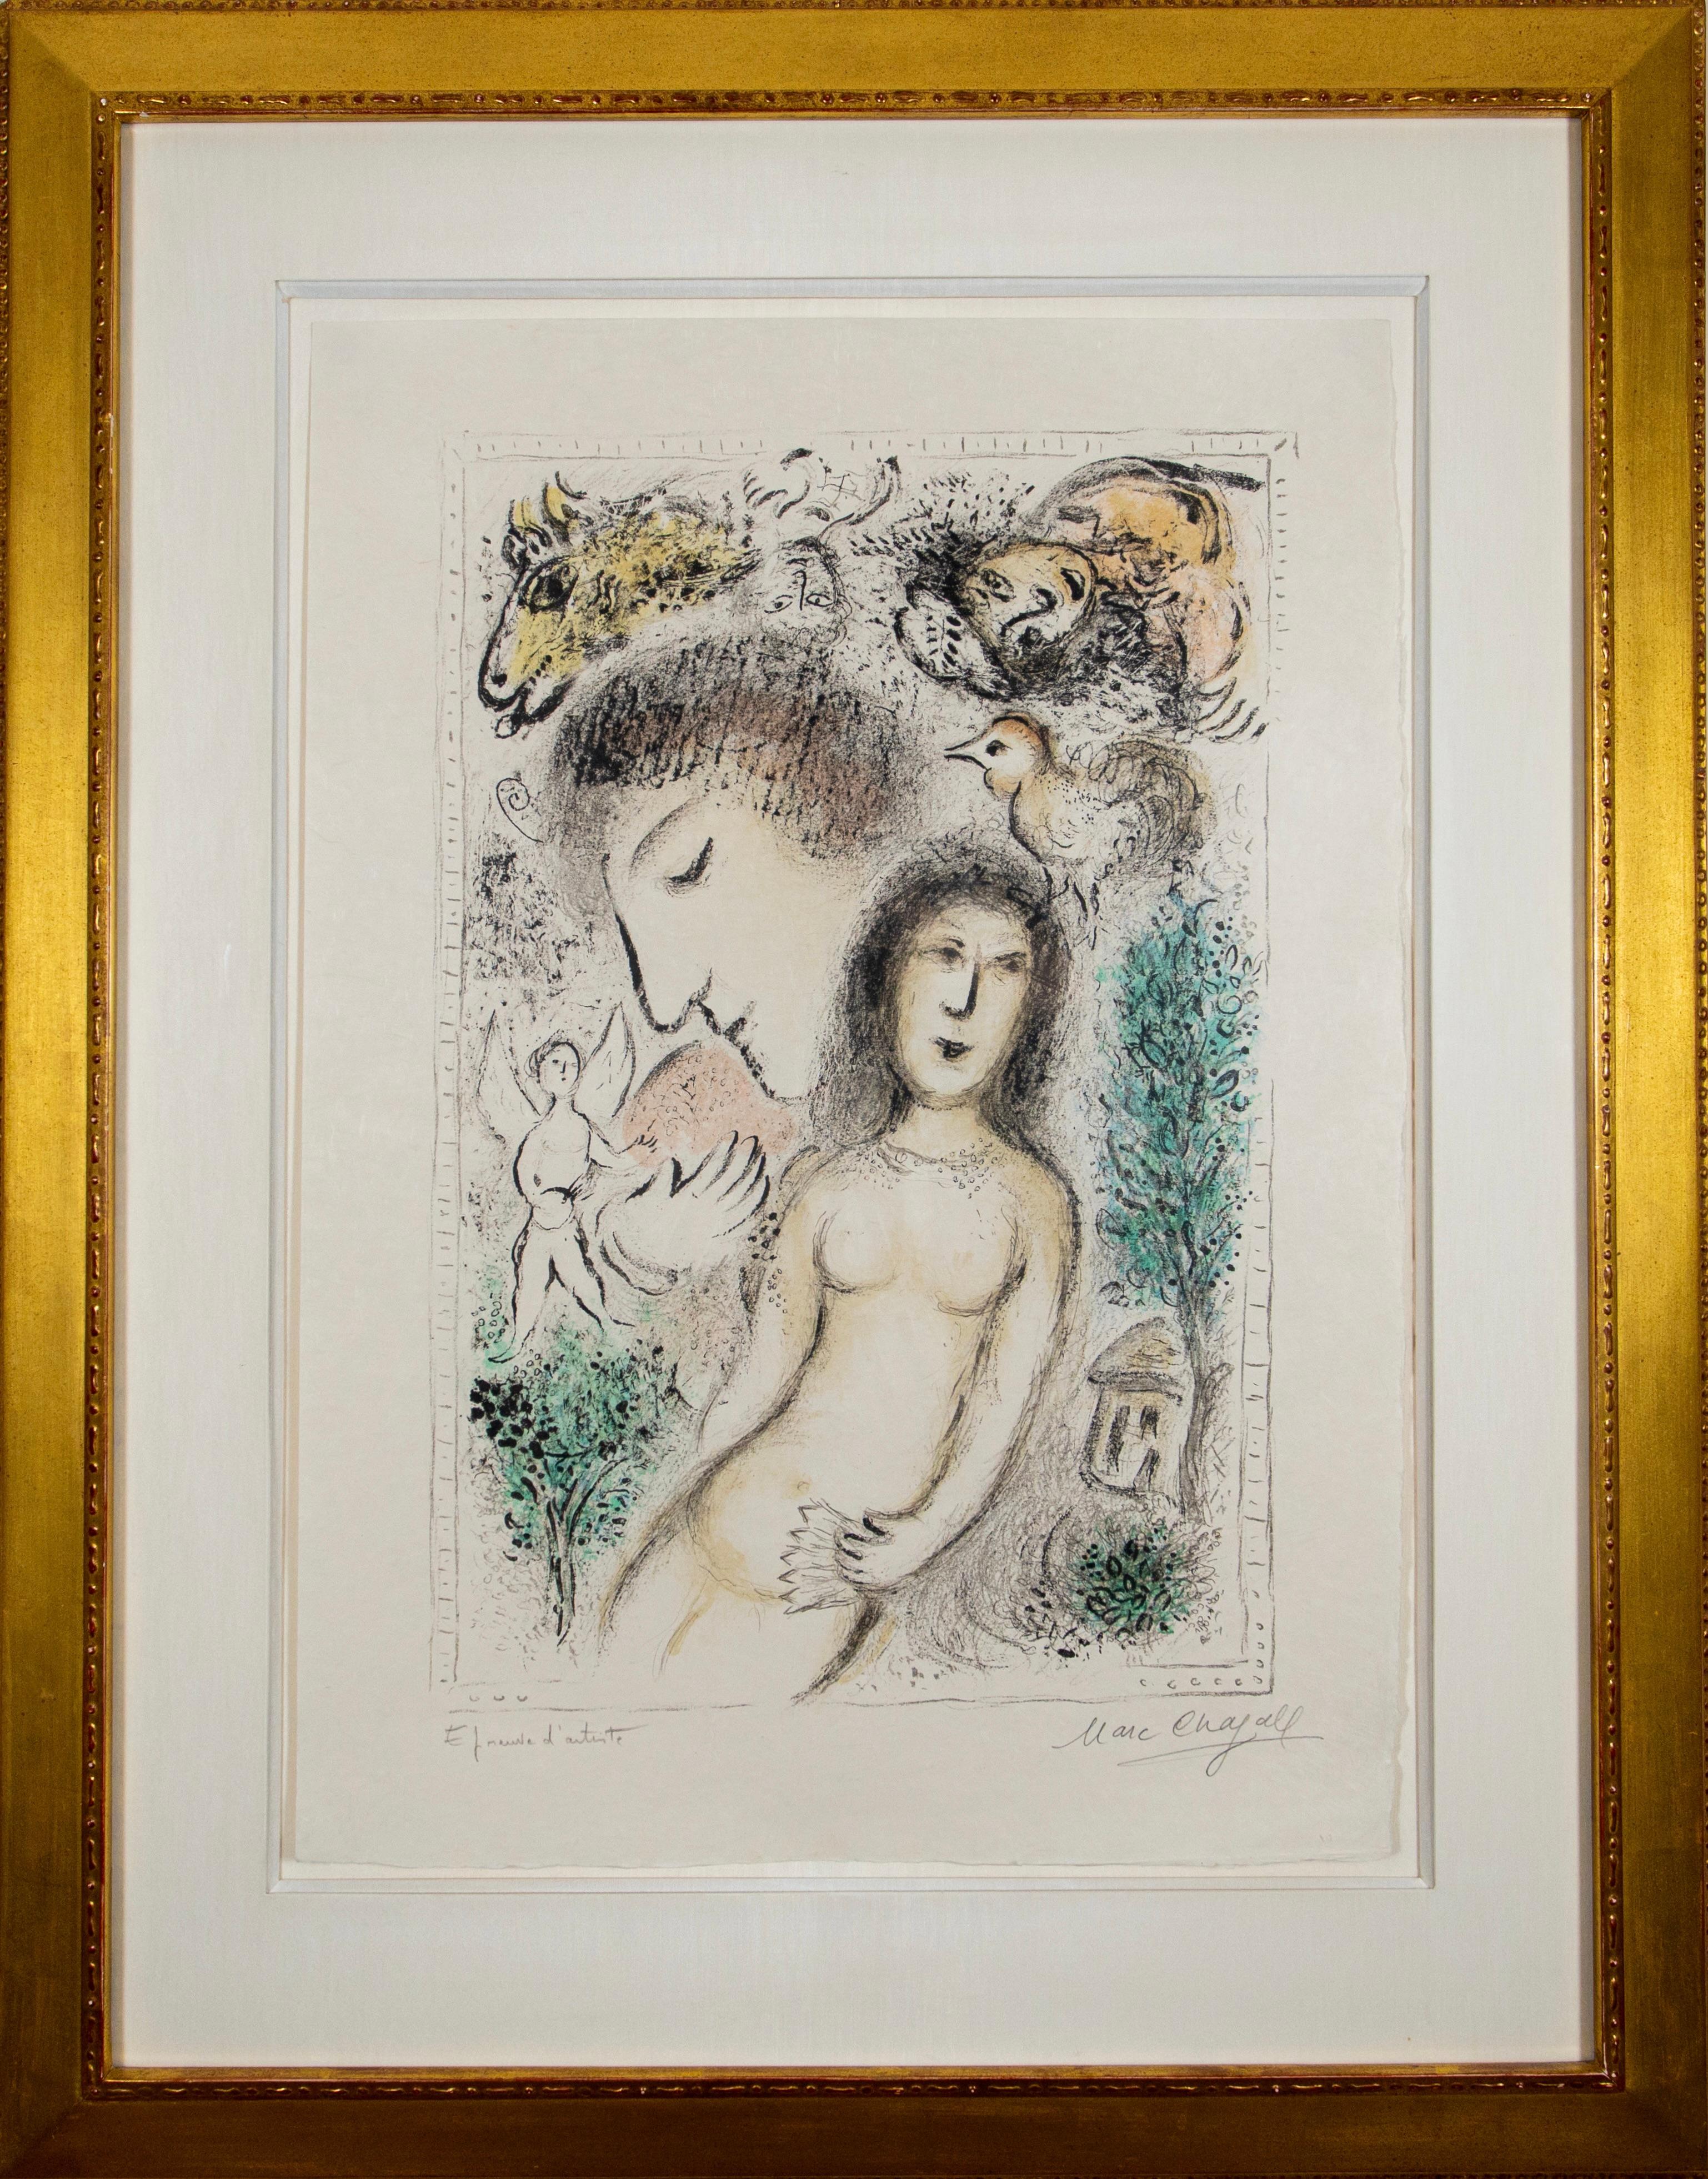 “Le Nu” The Nude - Color lithograph 1978 - Framed - Signed - angel, bird - Print by Marc Chagall